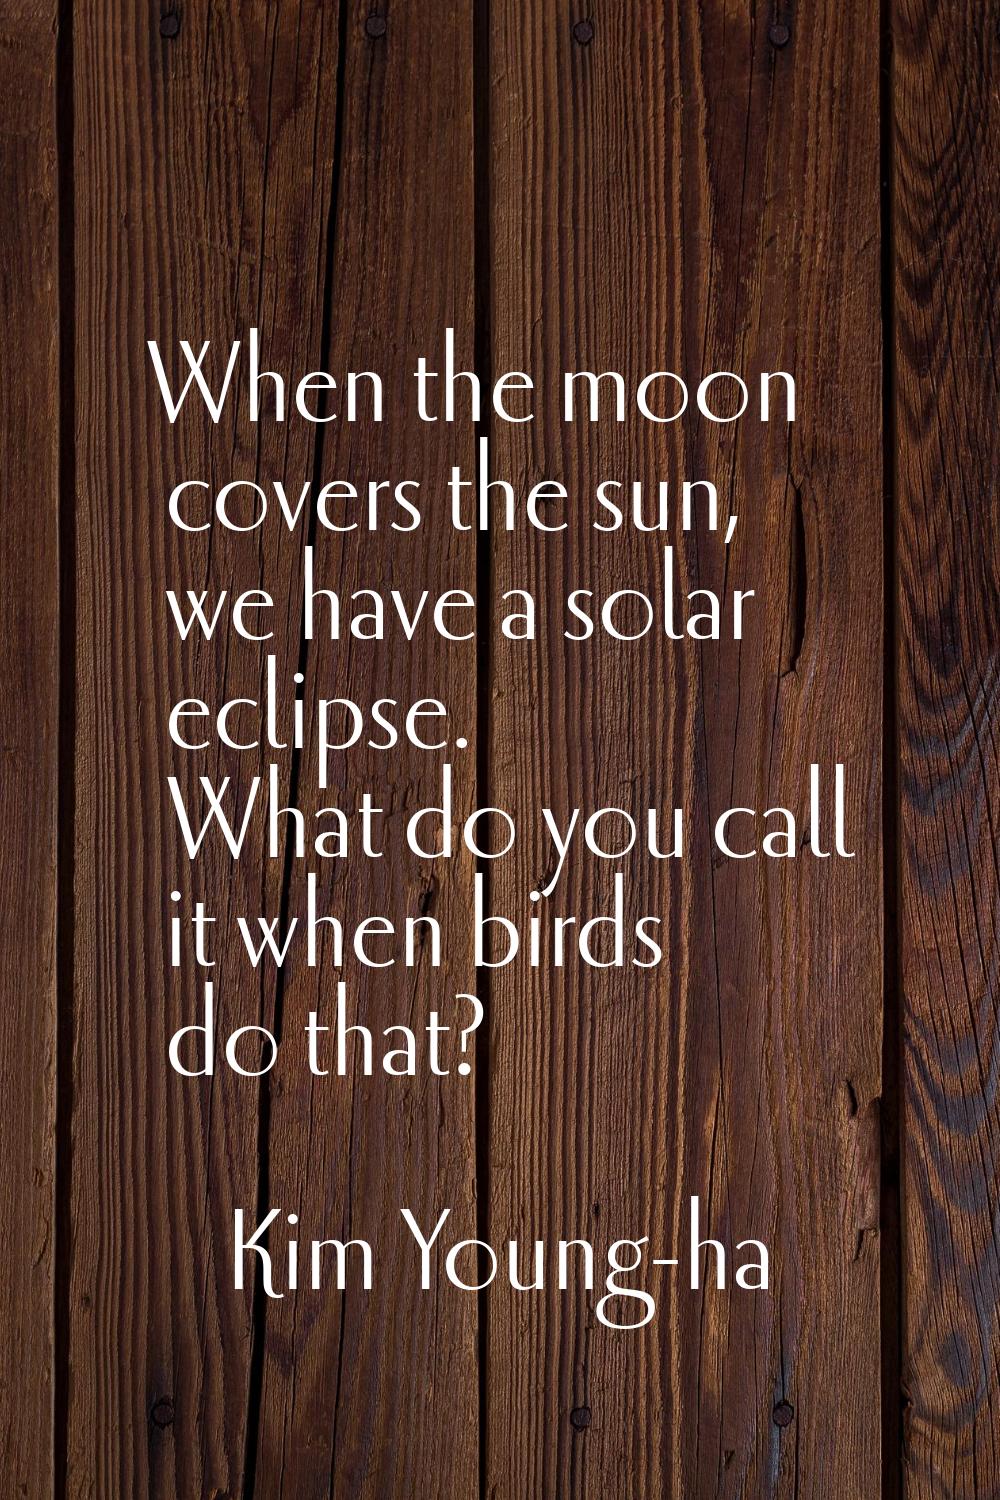 When the moon covers the sun, we have a solar eclipse. What do you call it when birds do that?